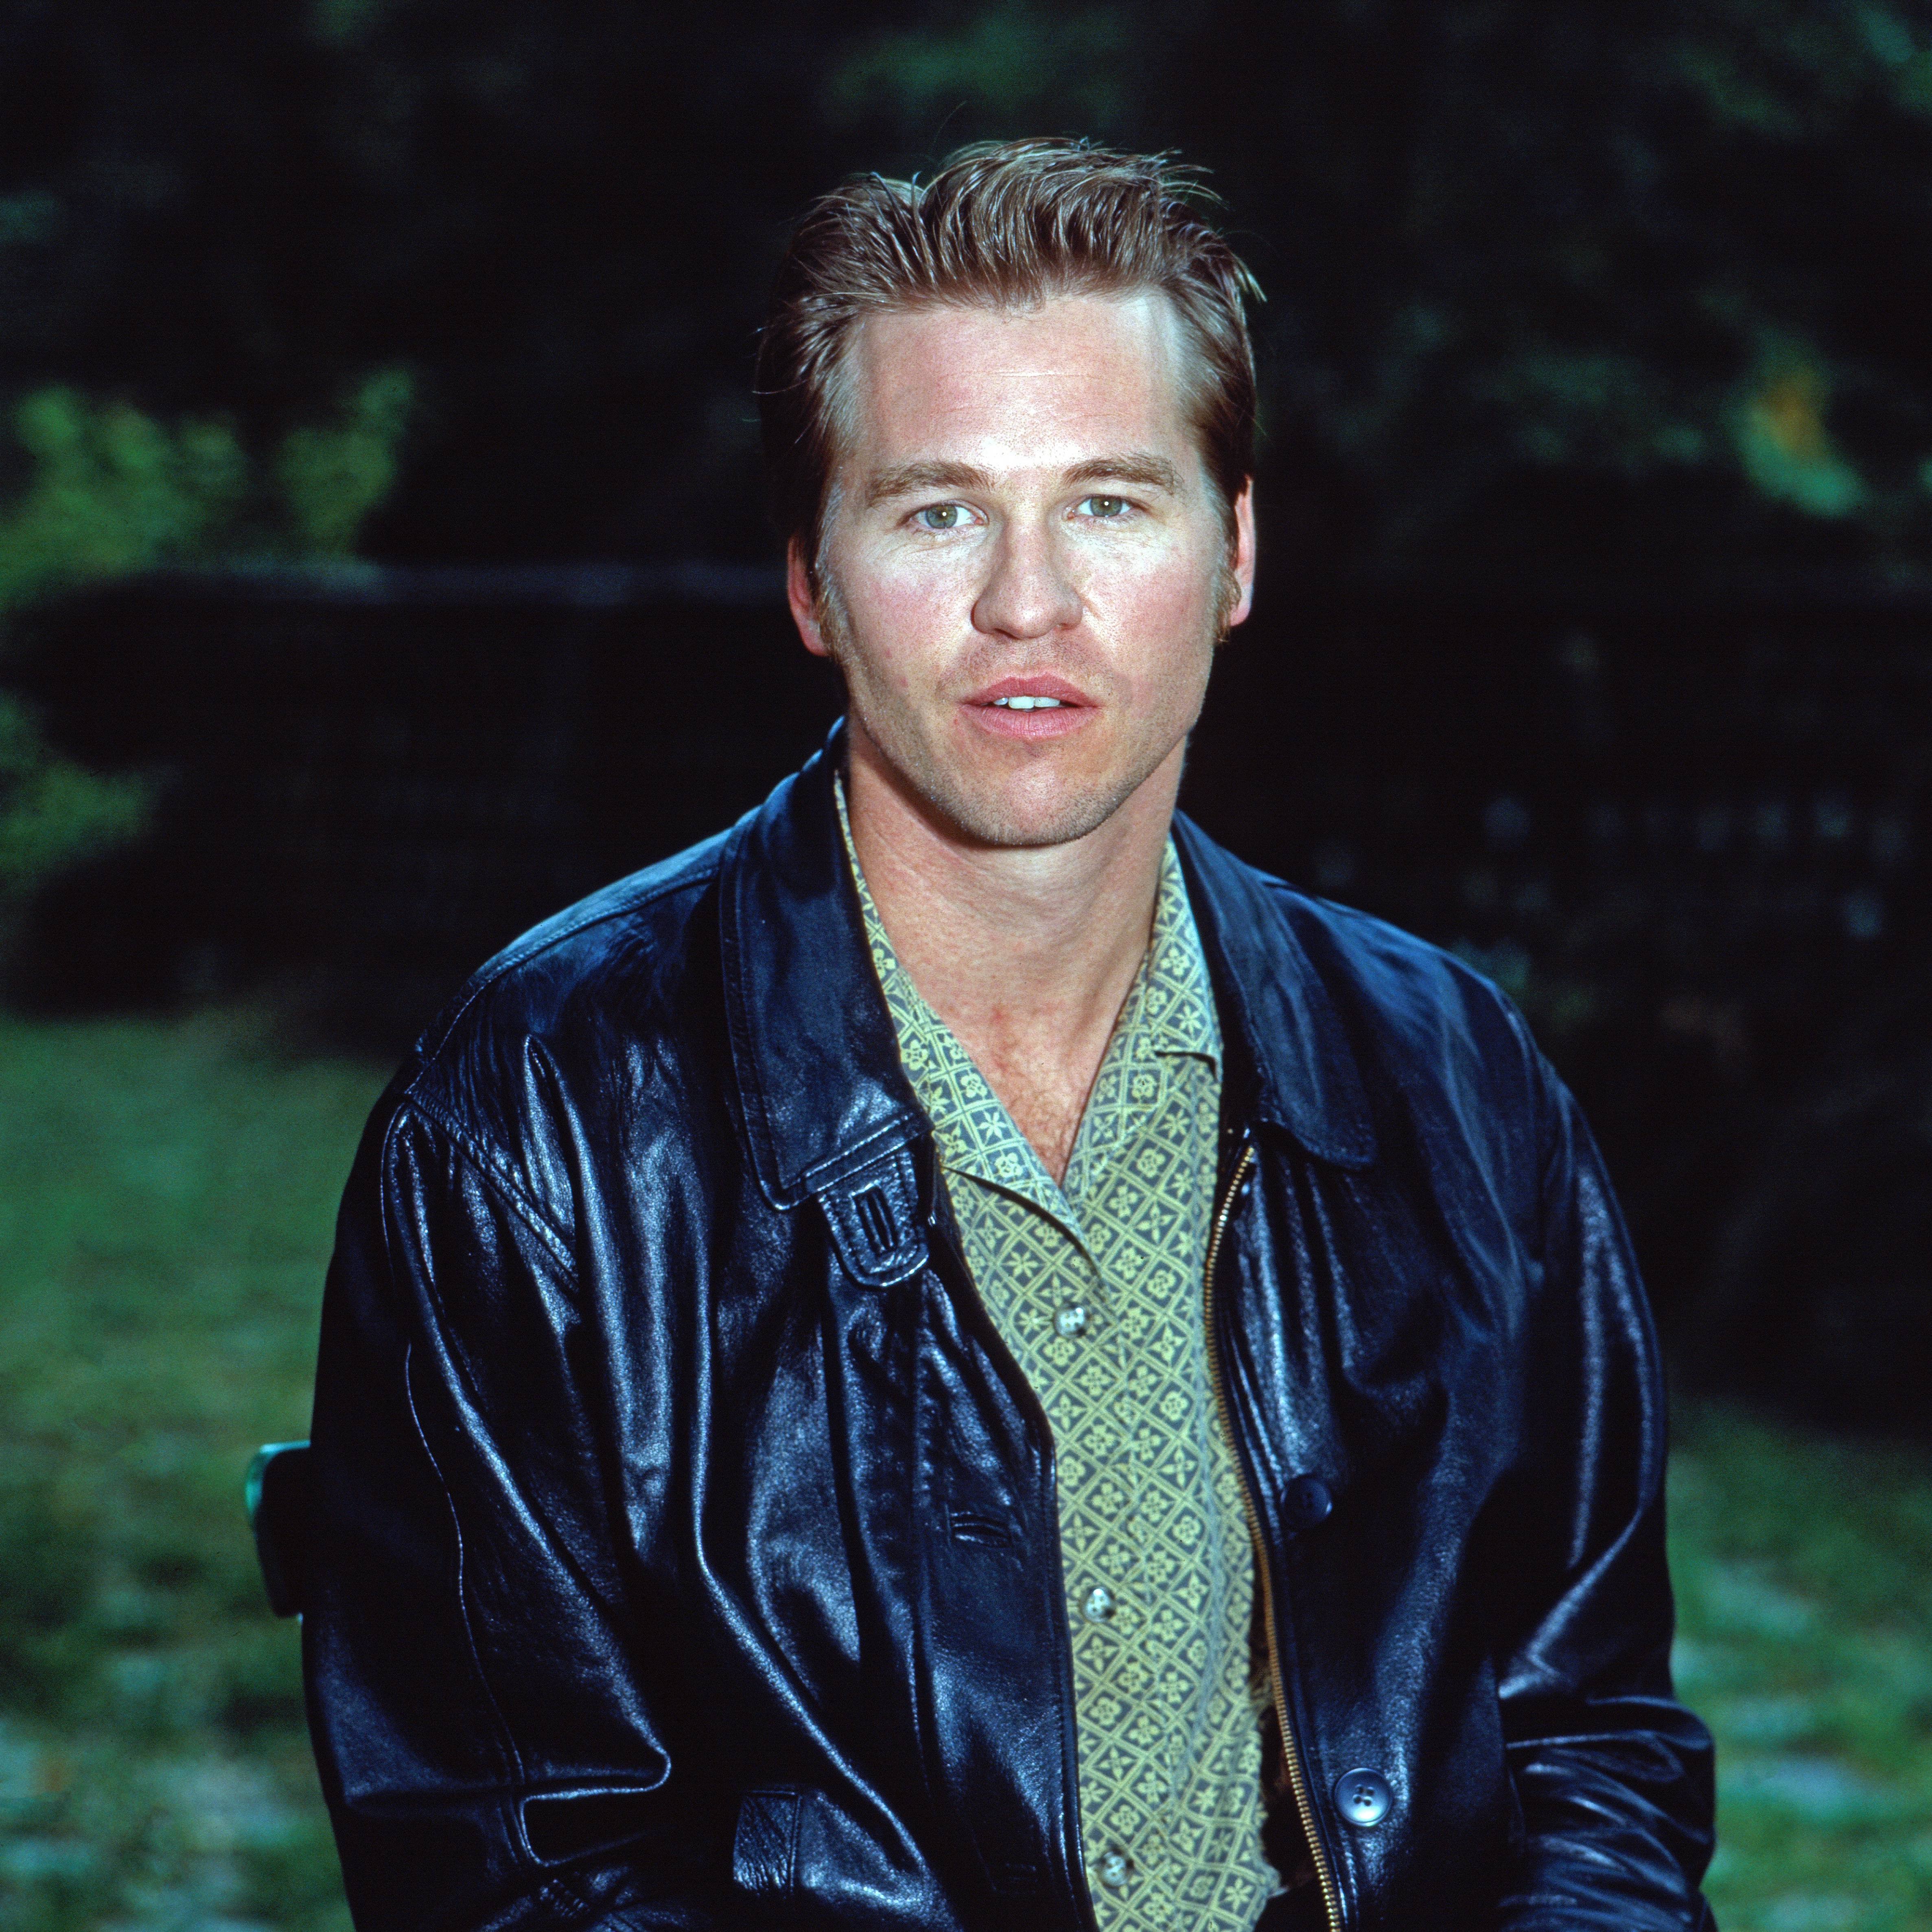 Val Kilmer during an interview in Munich in 1992 | Source: Getty Images